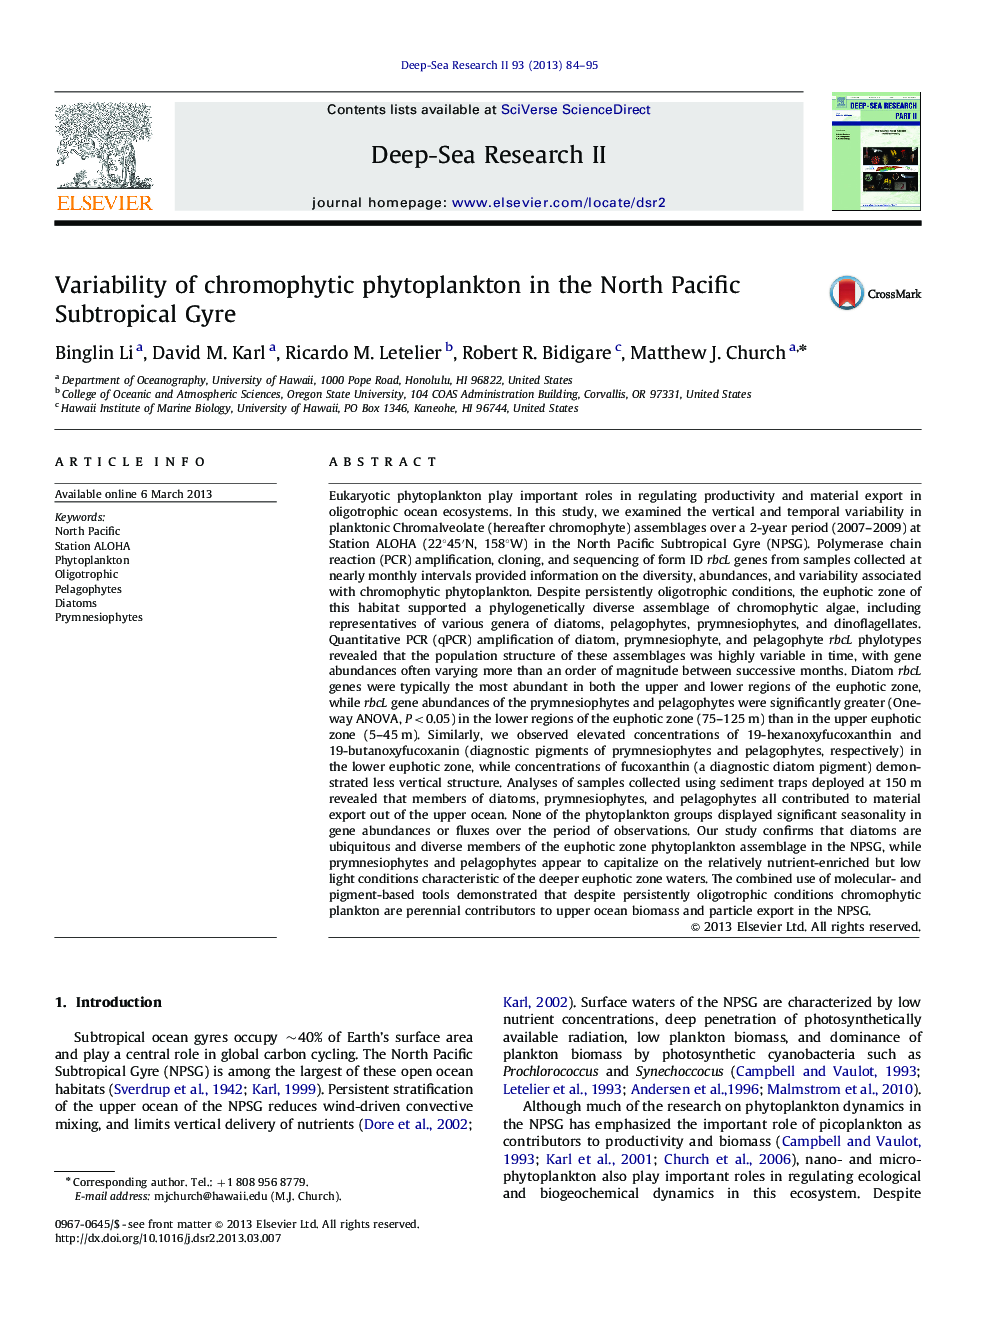 Variability of chromophytic phytoplankton in the North Pacific Subtropical Gyre